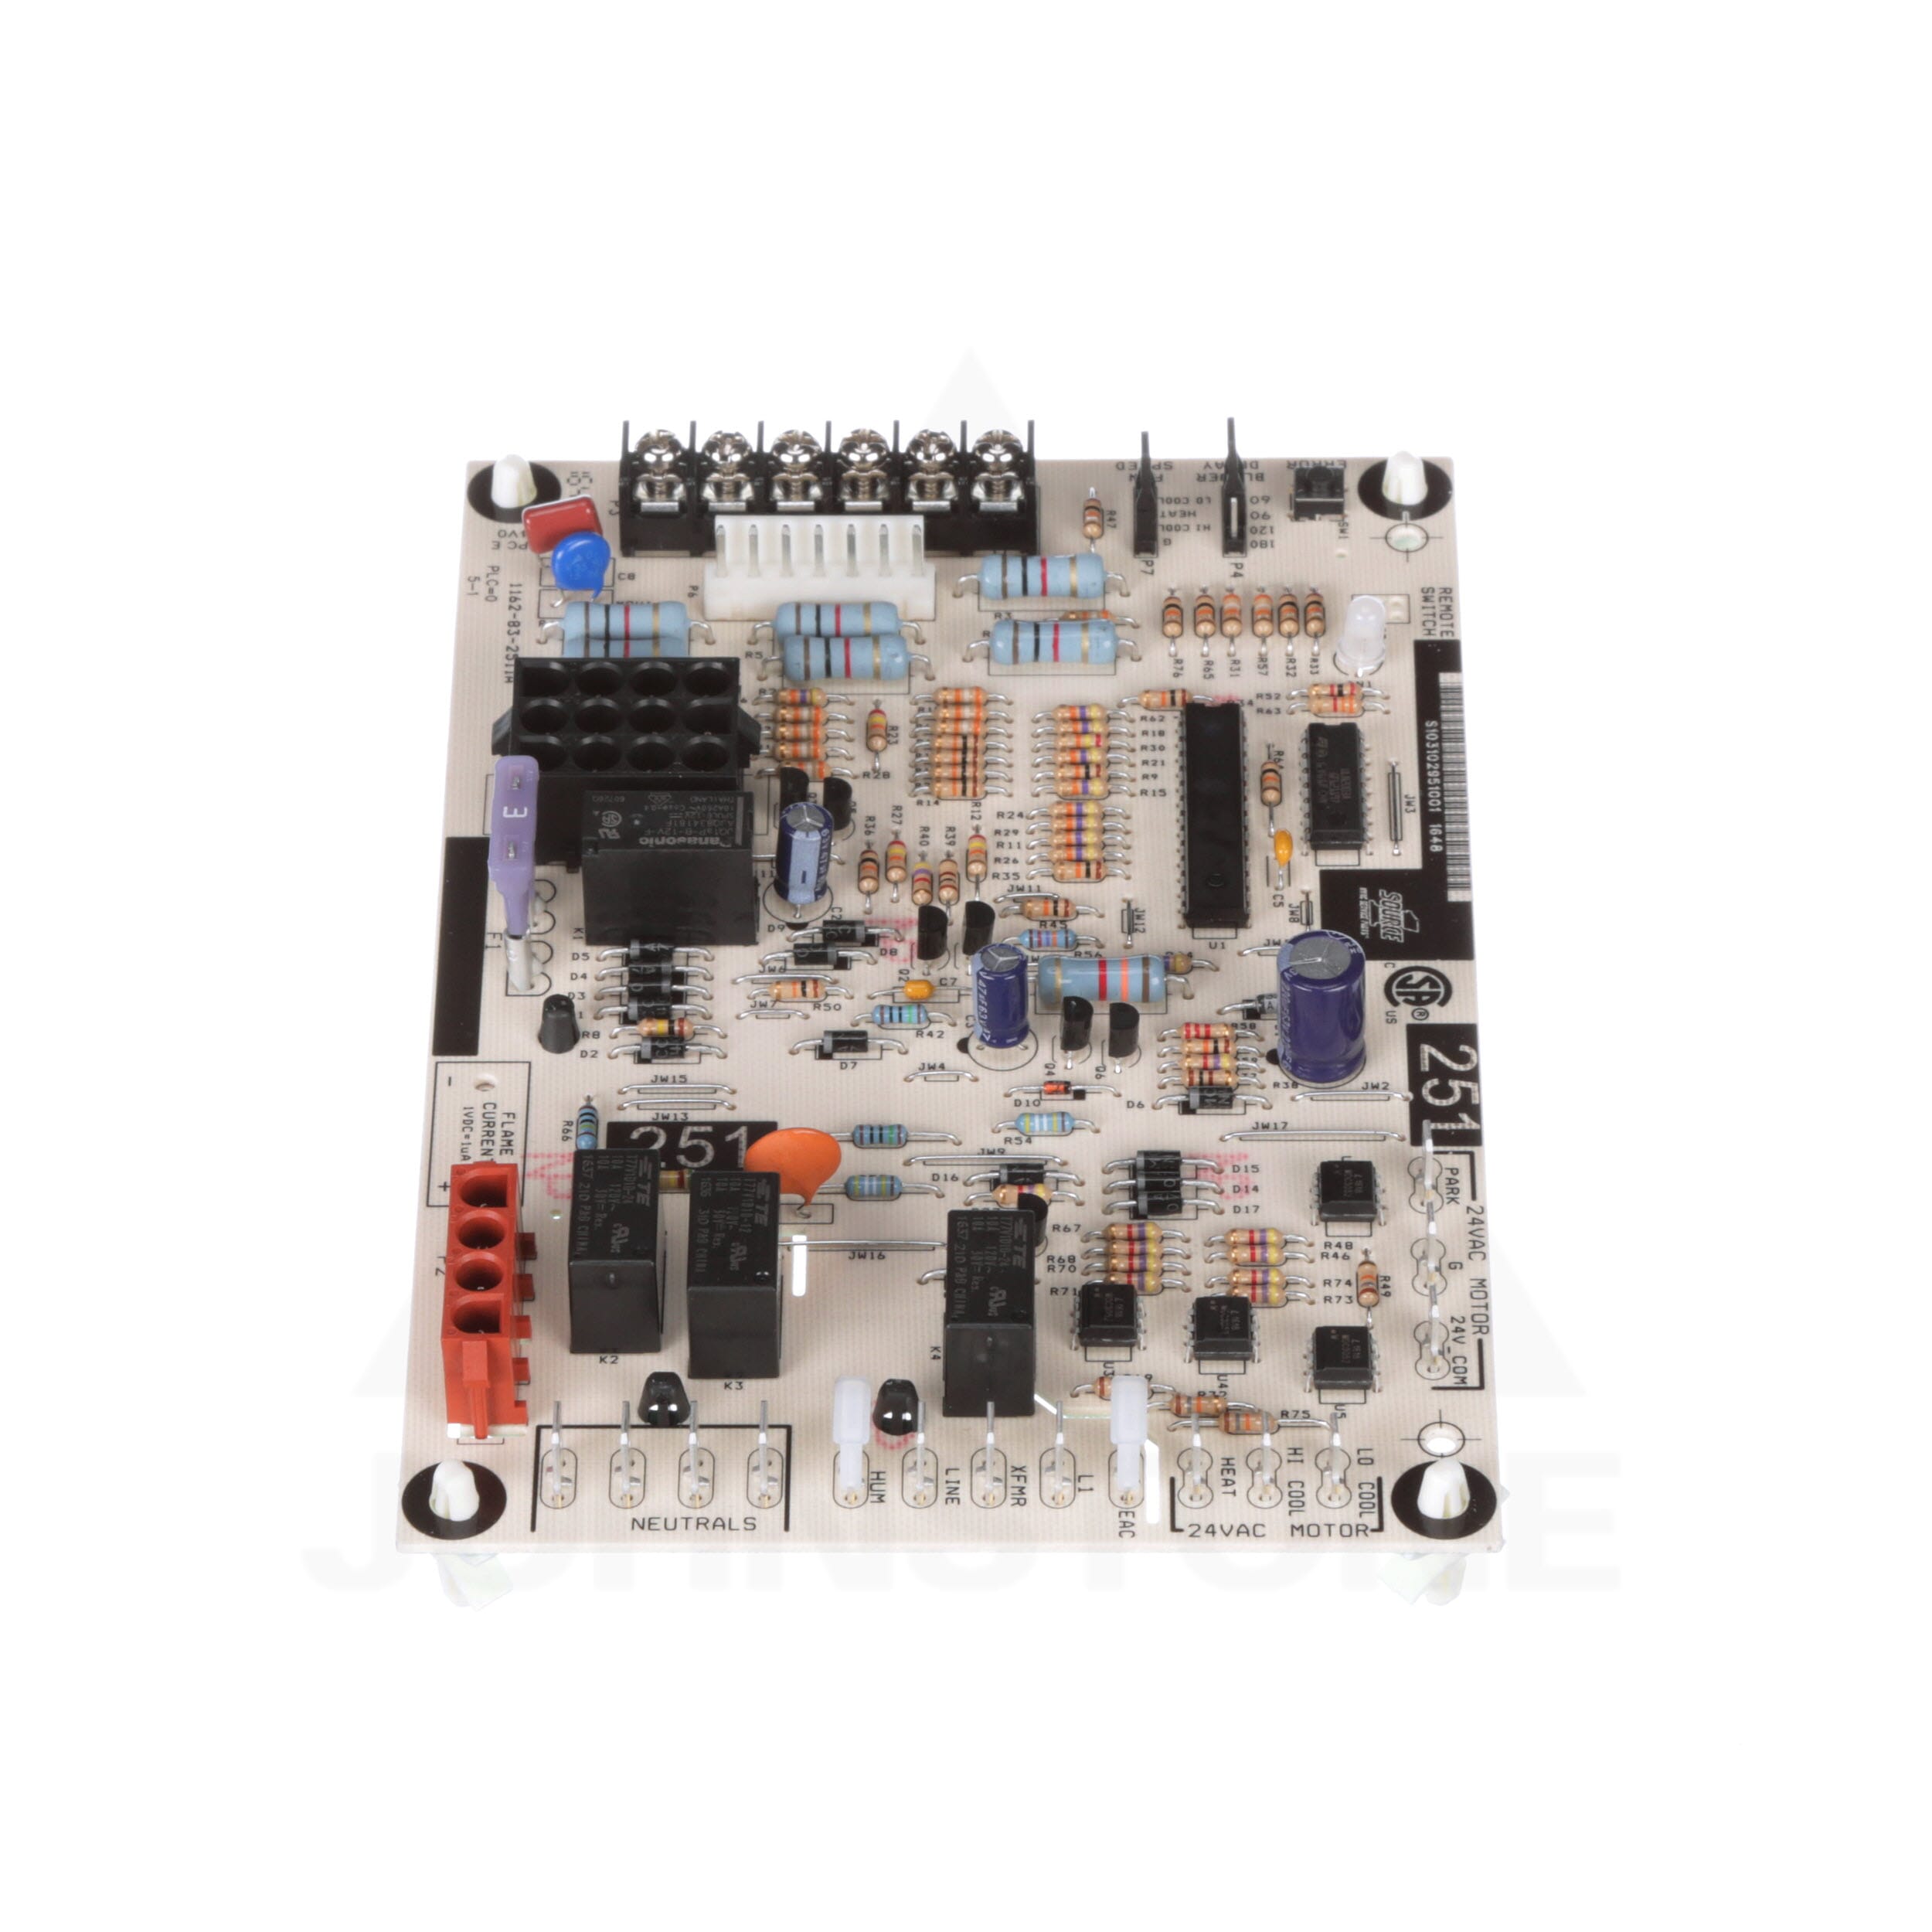 for sale online Source 1 Board Control Single Stage X13 s1-03102951001 